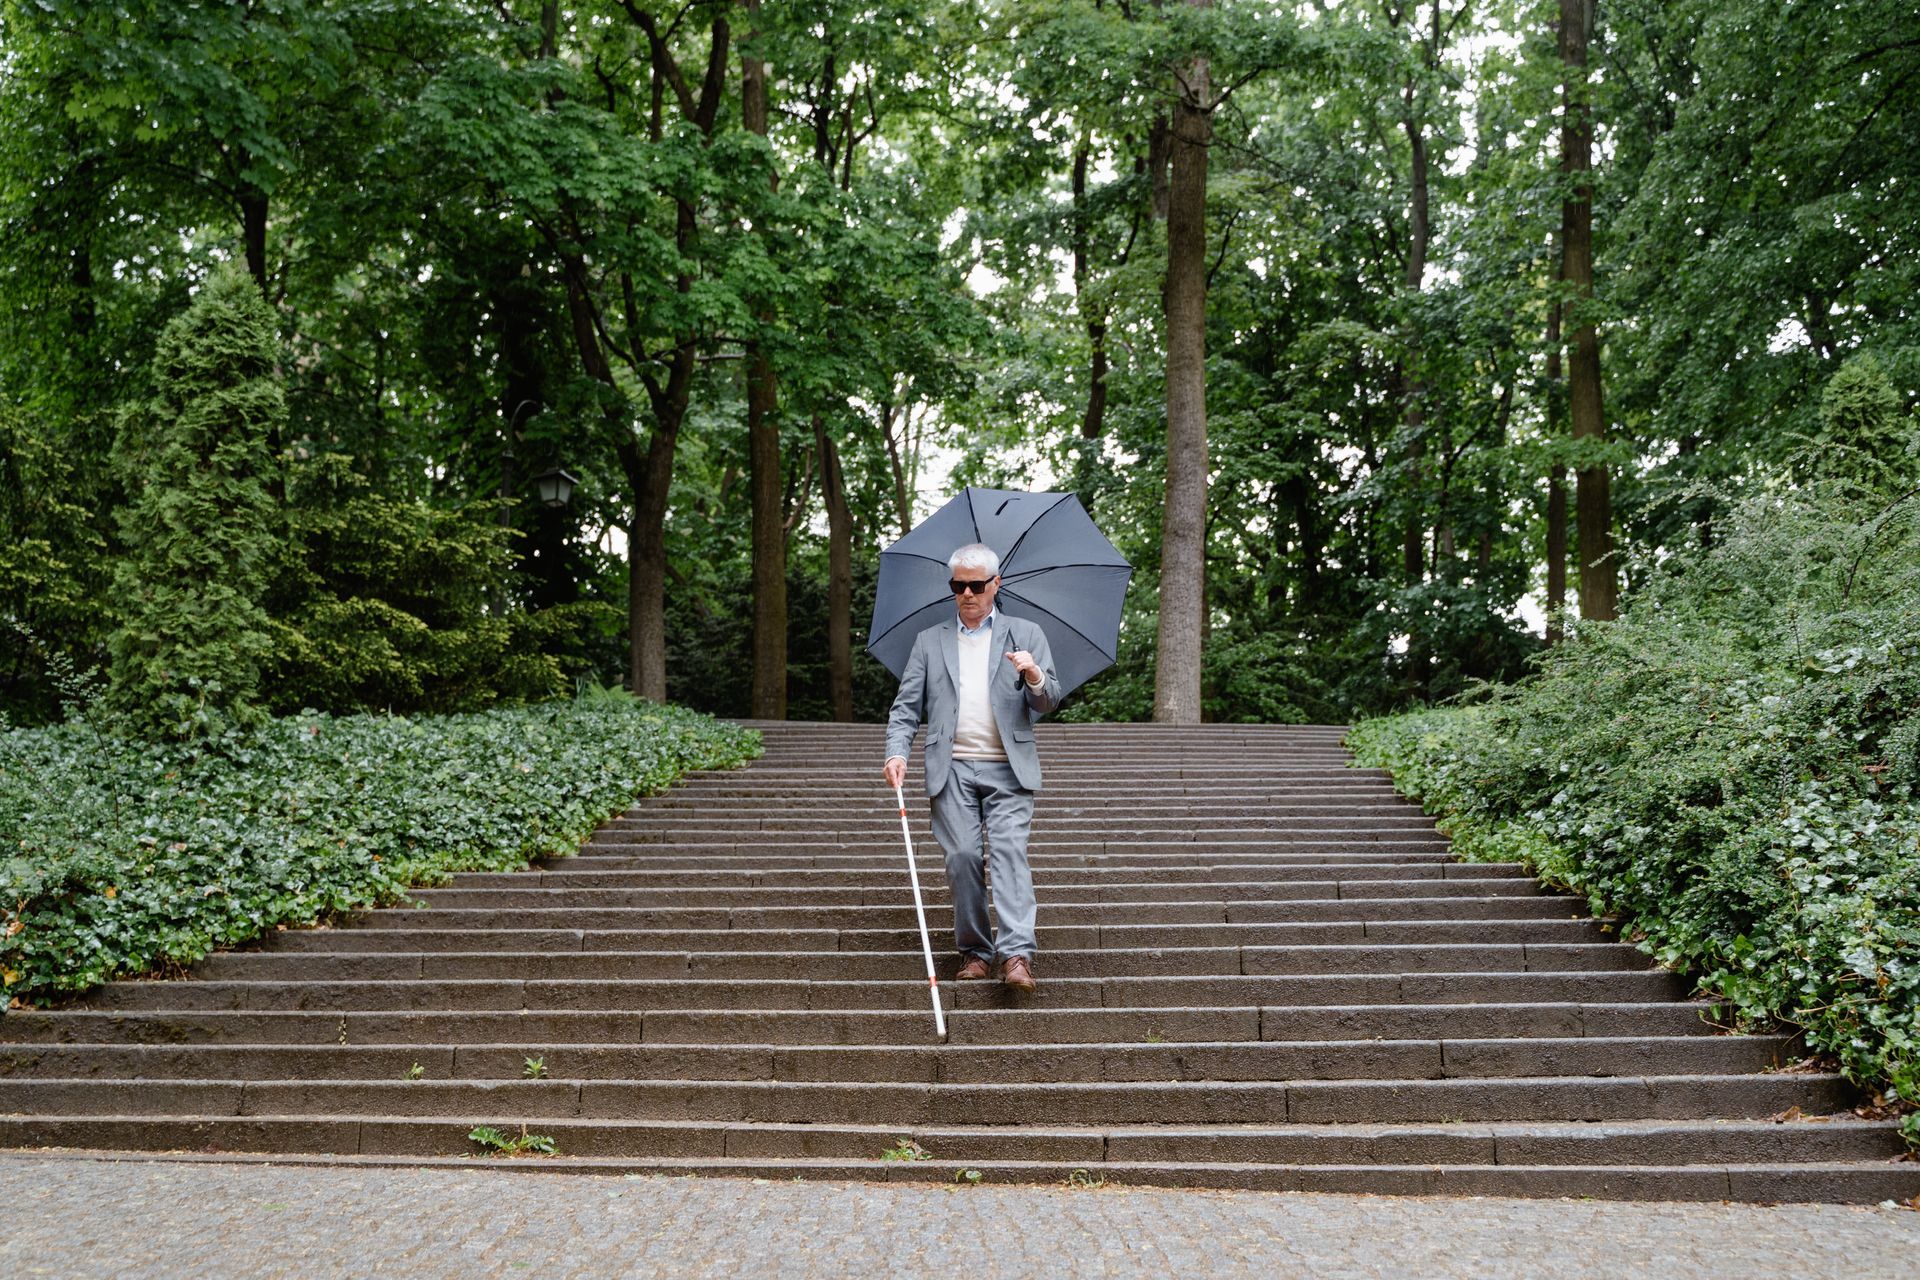 An older, smartly dressed gentleman holding an umbrella navigates down stone steps using a white cane.